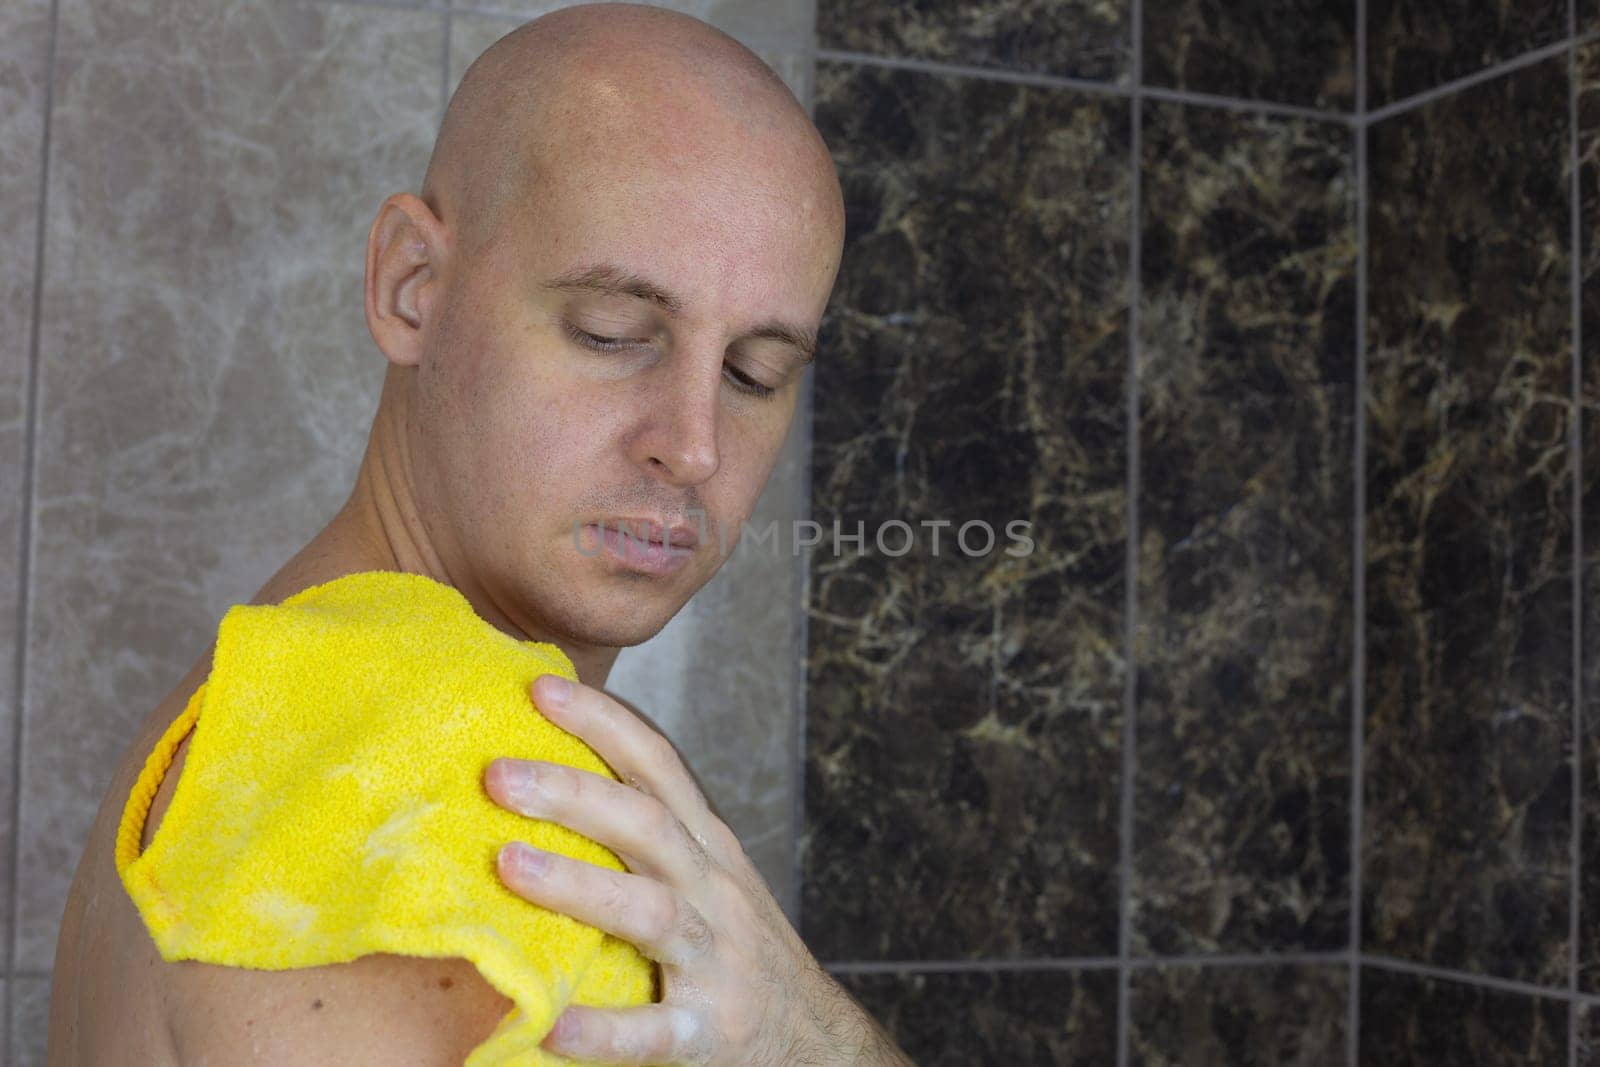 Man without hair washes himself in shower with washcloth by timurmalazoniia